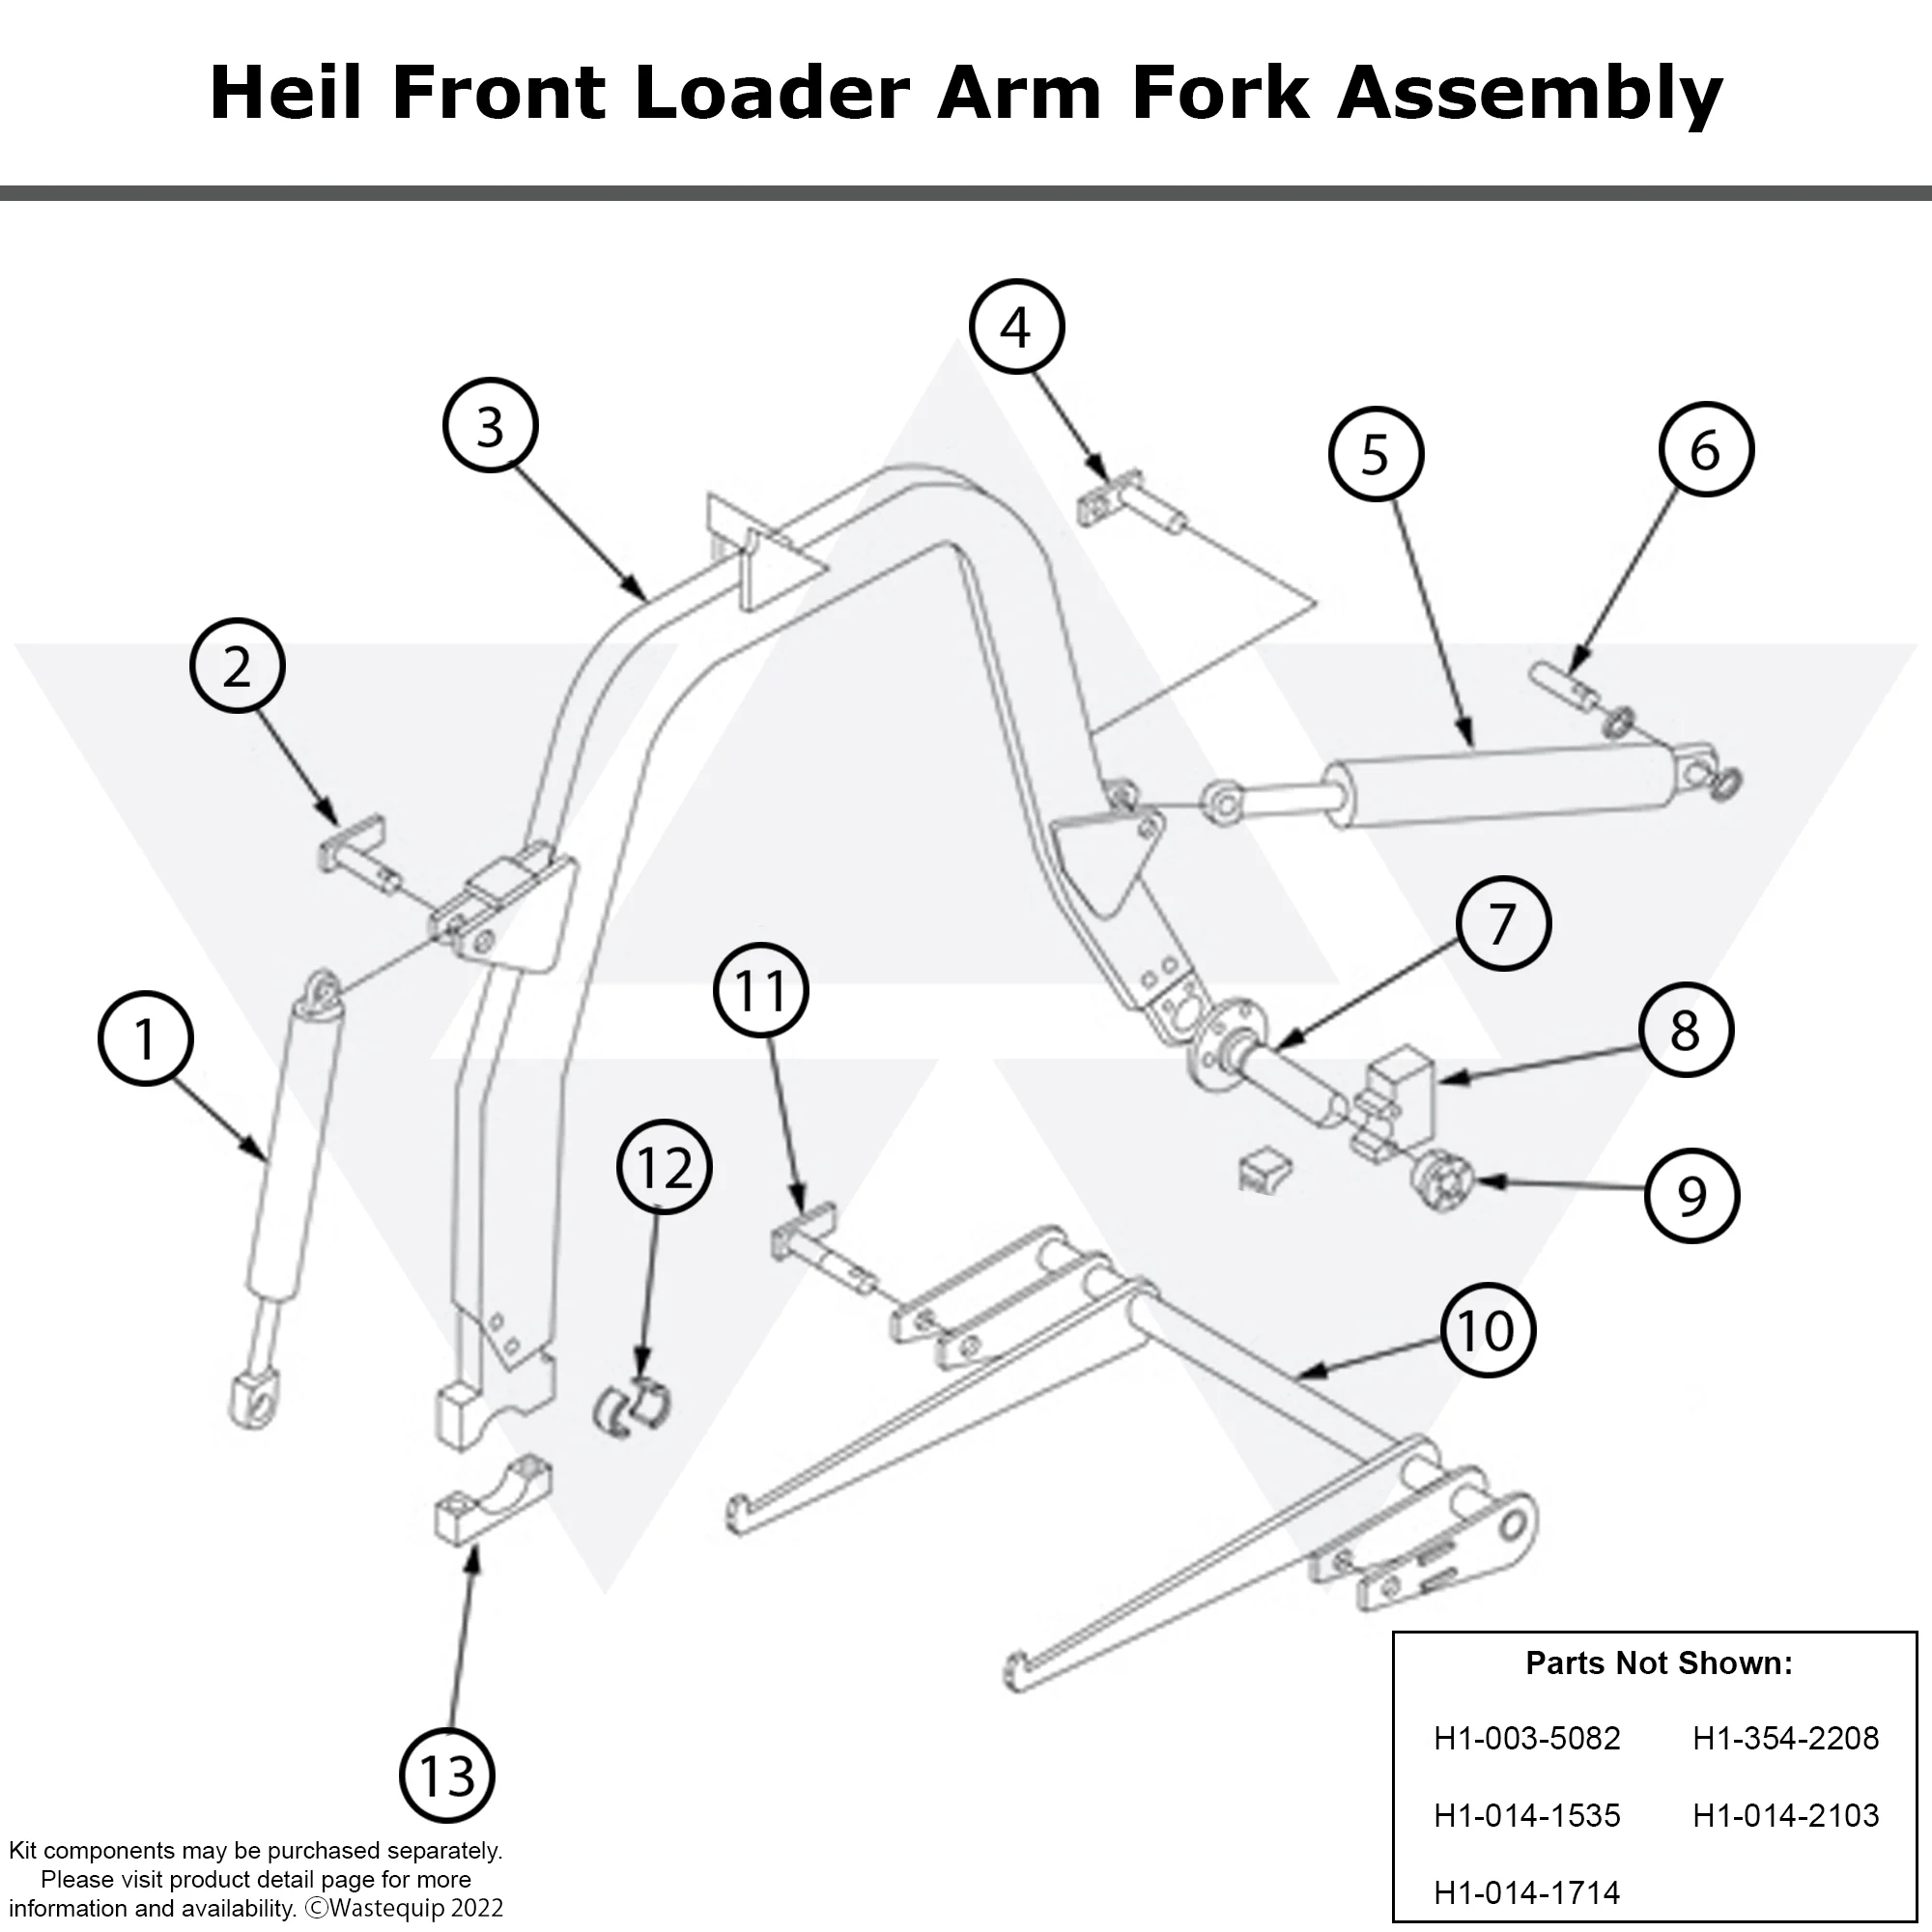 Wastebuilt® Replacement for Heil FL Arm Fork Assembly